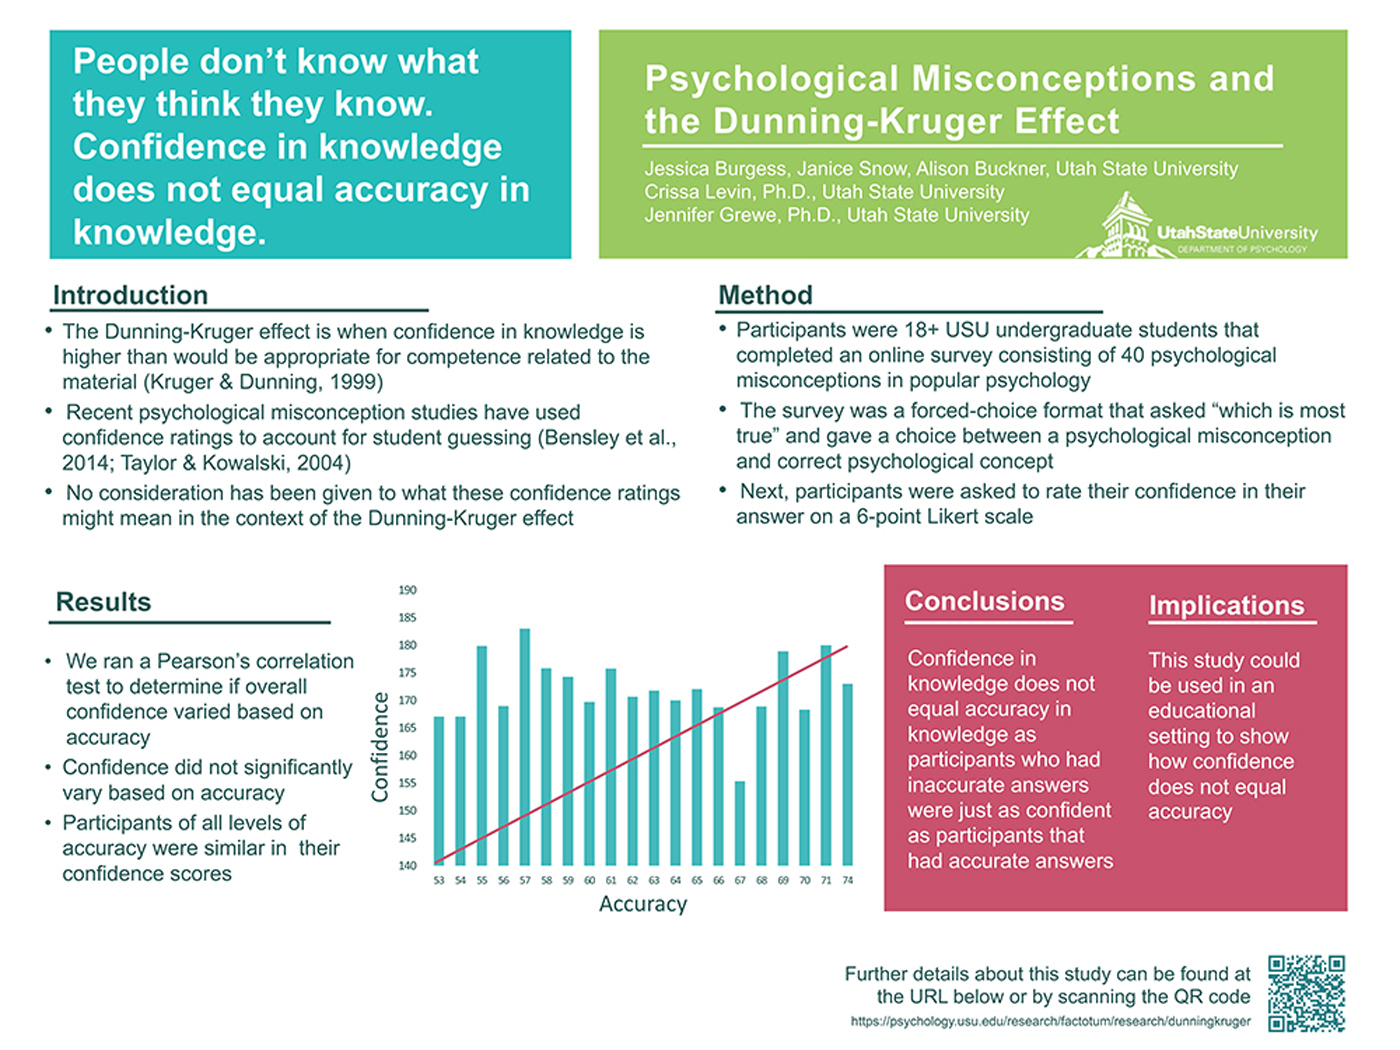 Psychological Misconceptions and the Dunning-Kruger Effect